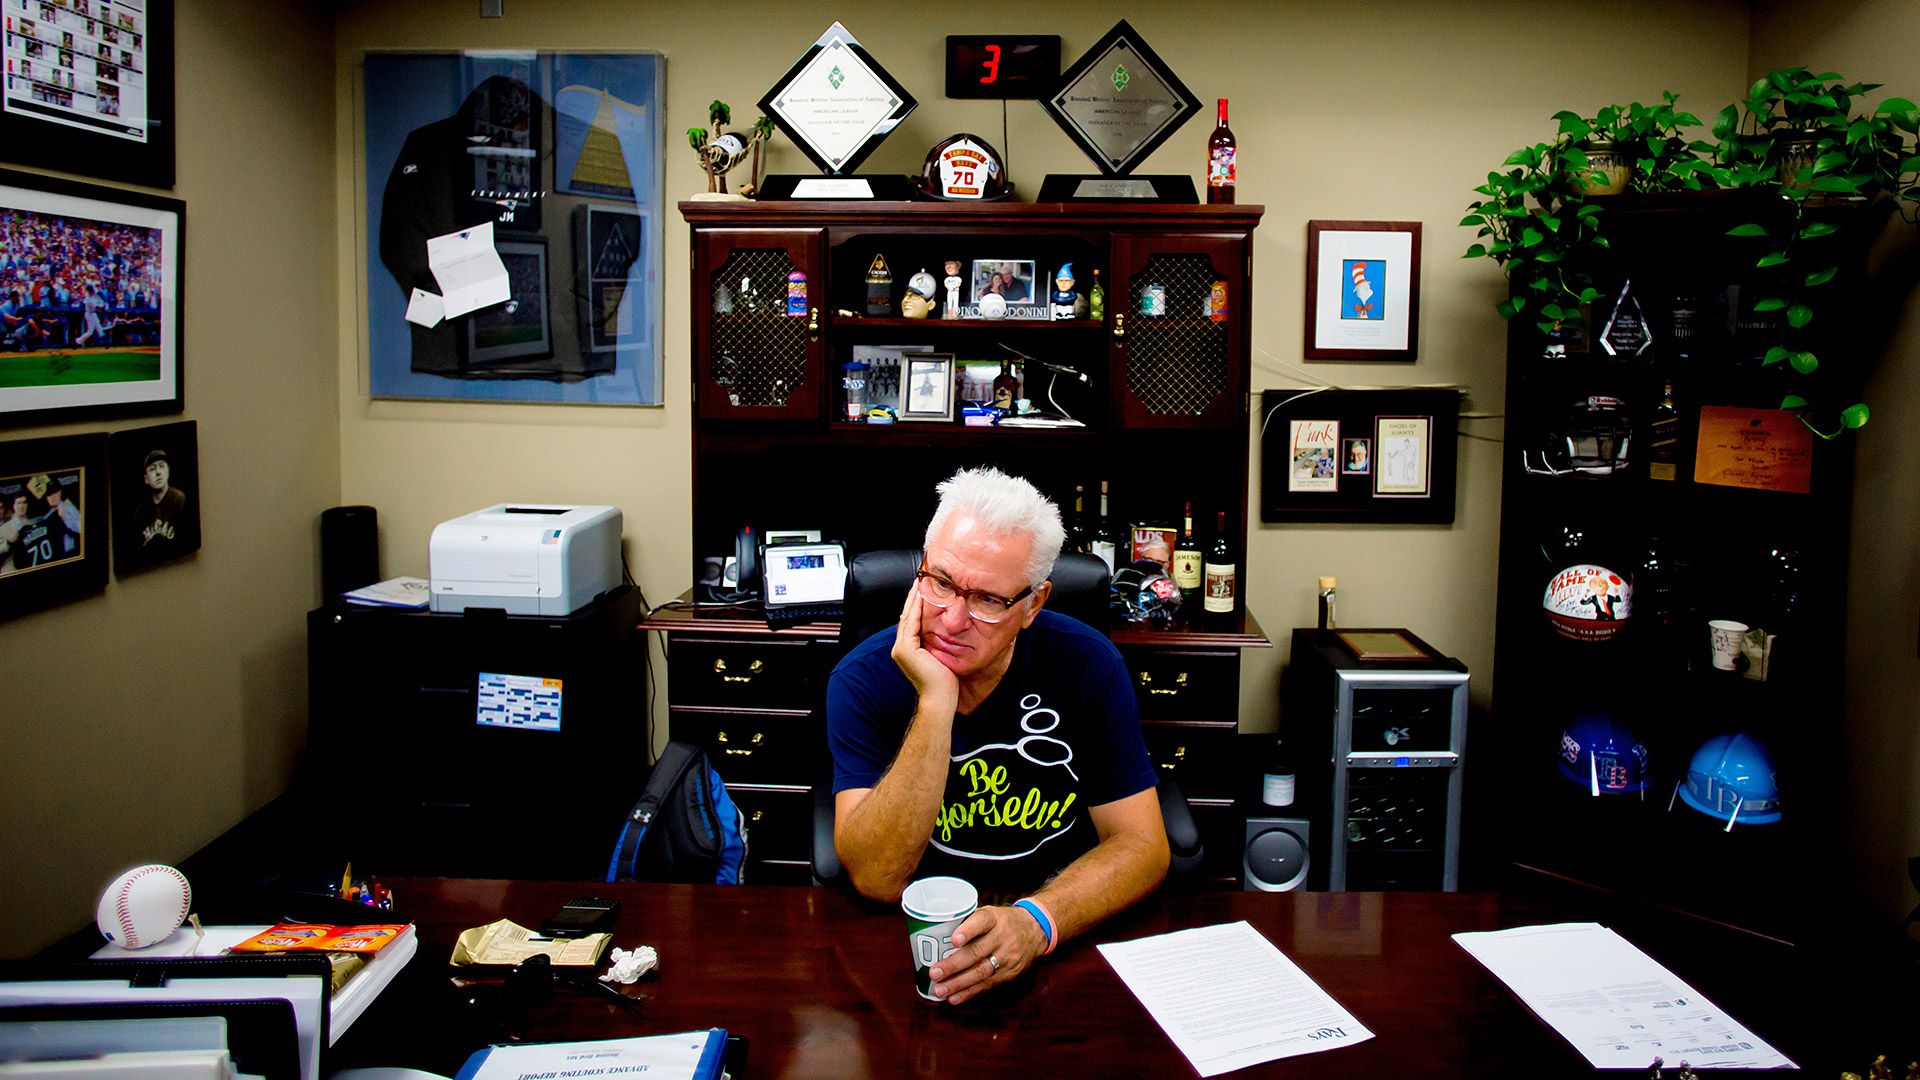 A usual day in the unusual life of Tampa Bay Rays manager Joe Maddon1920 x 1080